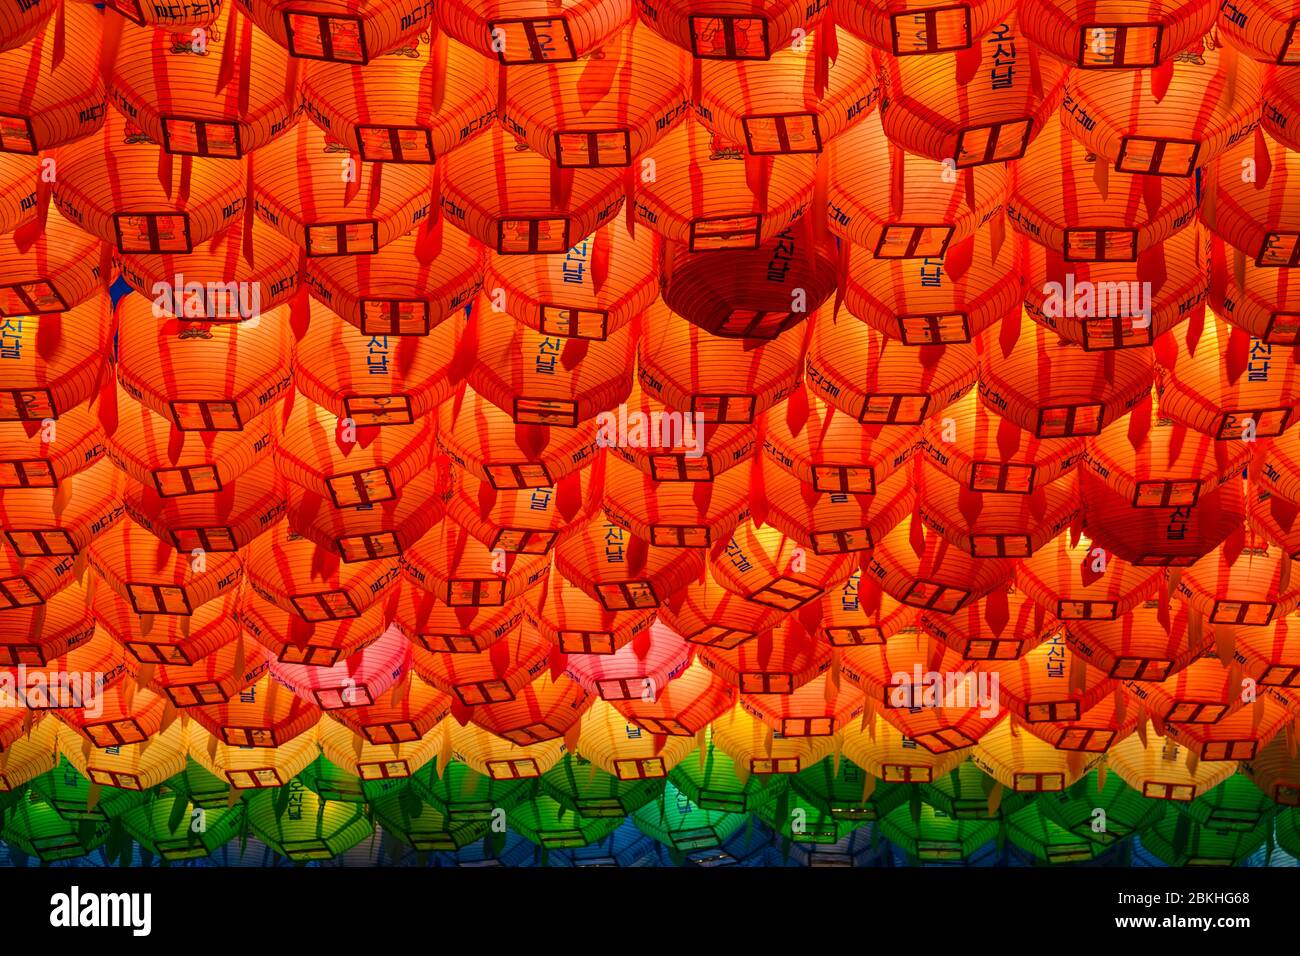 Rows and rows of colorful illuminated buddhist lotus lanterns hanging overhead at the . Jogyesa Buddhist temple in Seoul, South Korea. Stock Photo